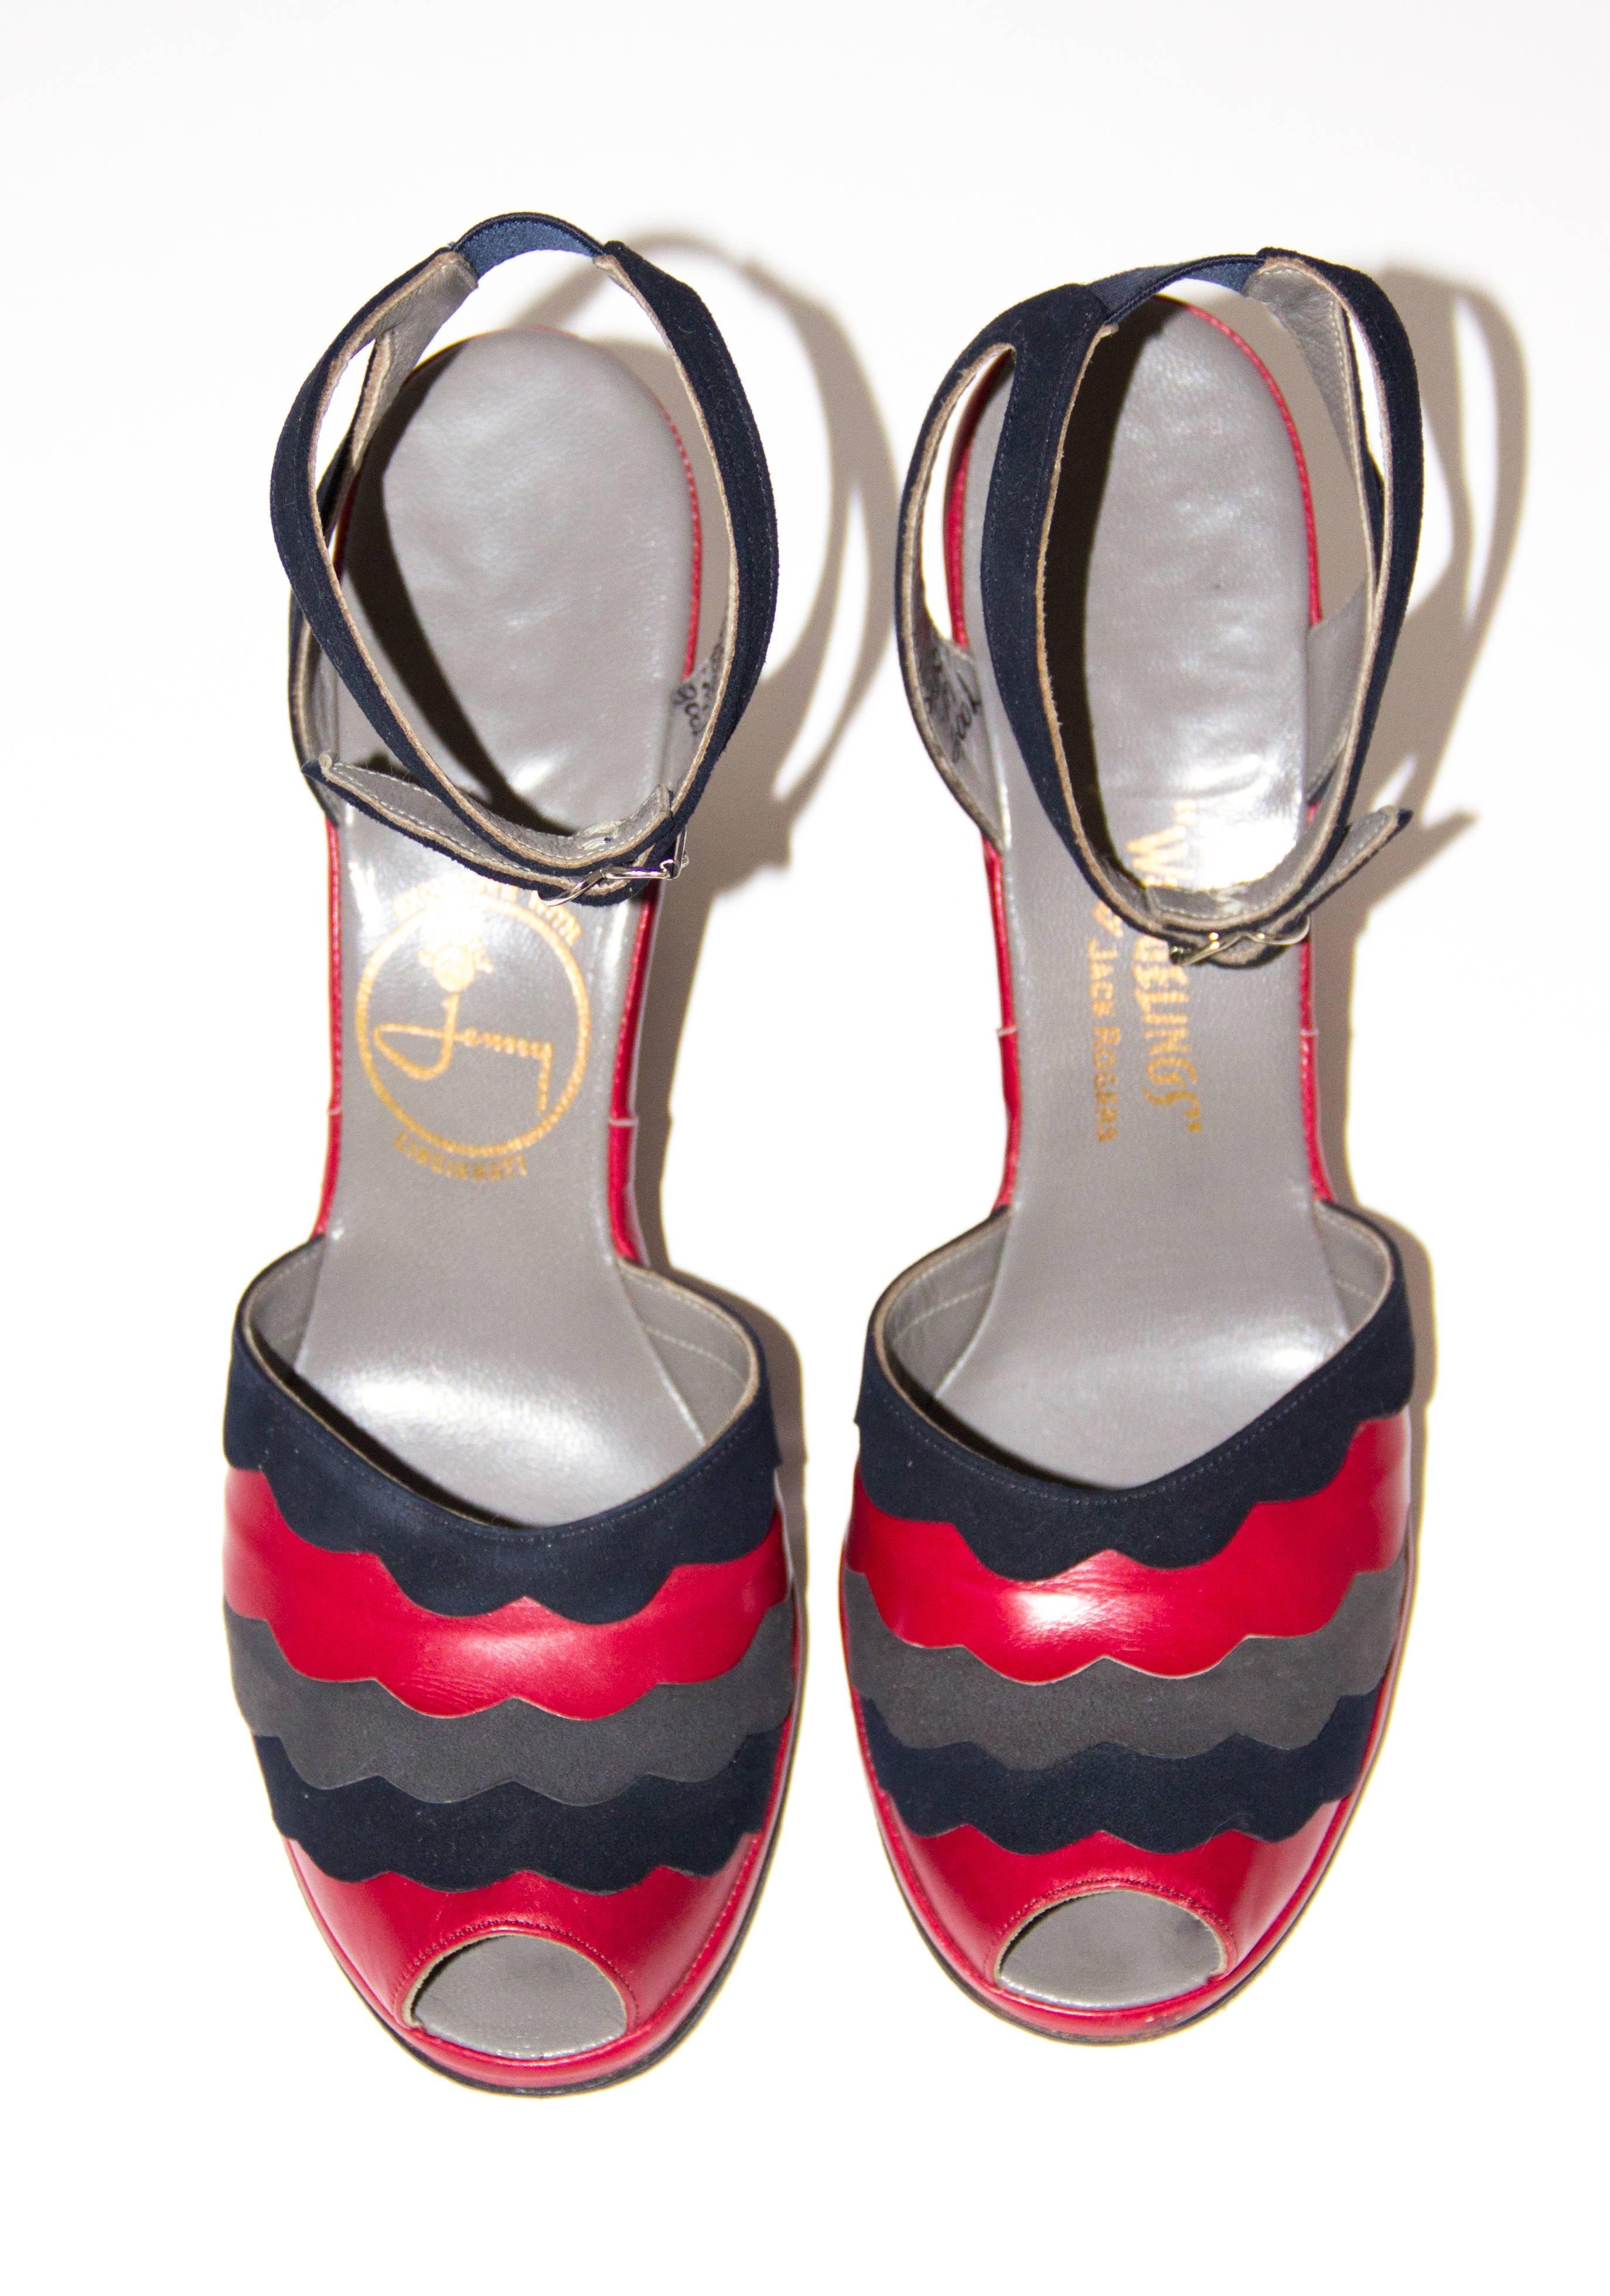 40s Red, Grey & Navy Blue Wedges Size 6. Suede and leather. Leather soles. 

Measurements:
Insole: 9 1/2